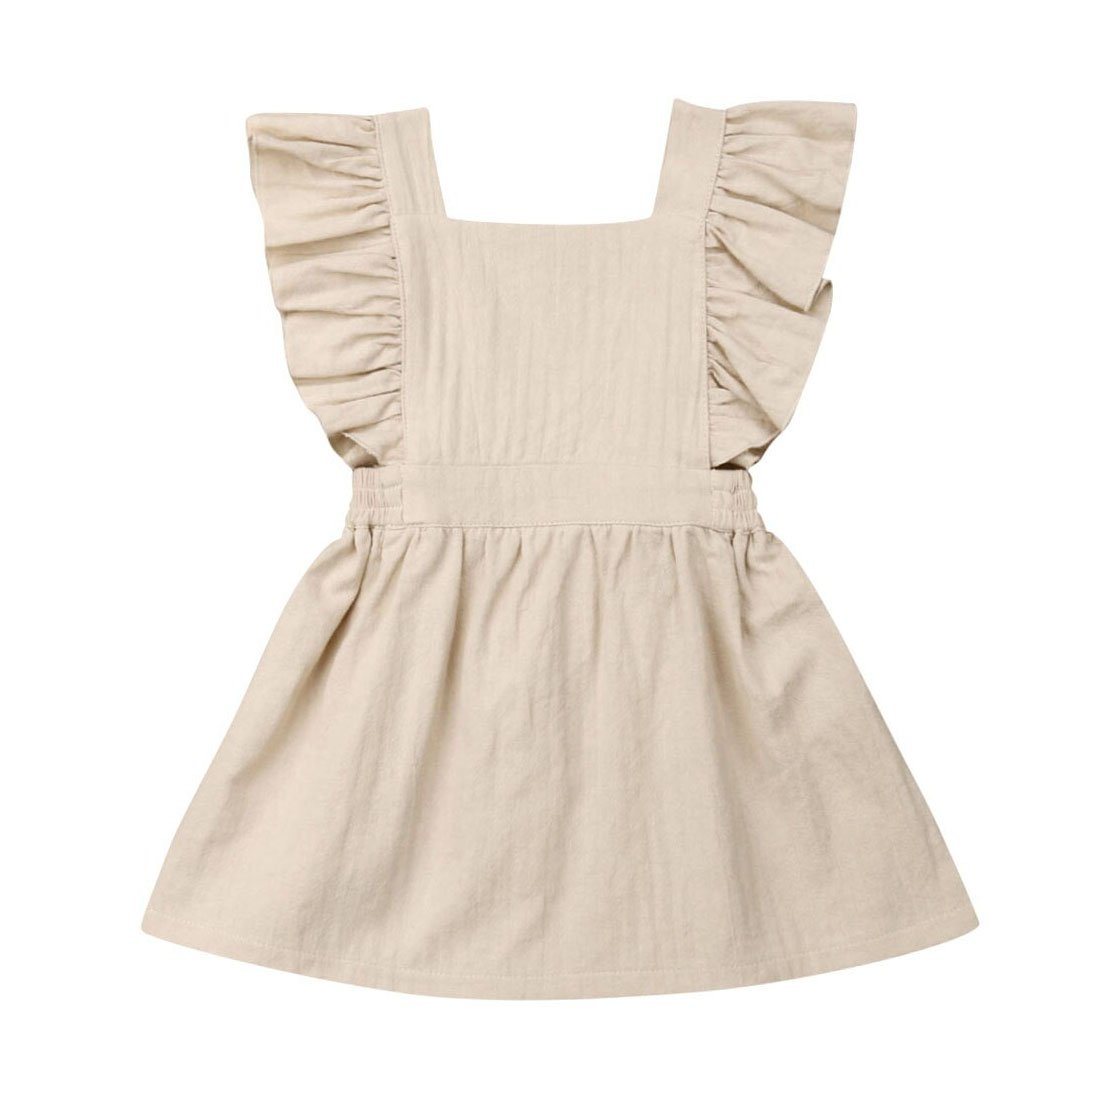 Solid Ruffled Toddler Dress   